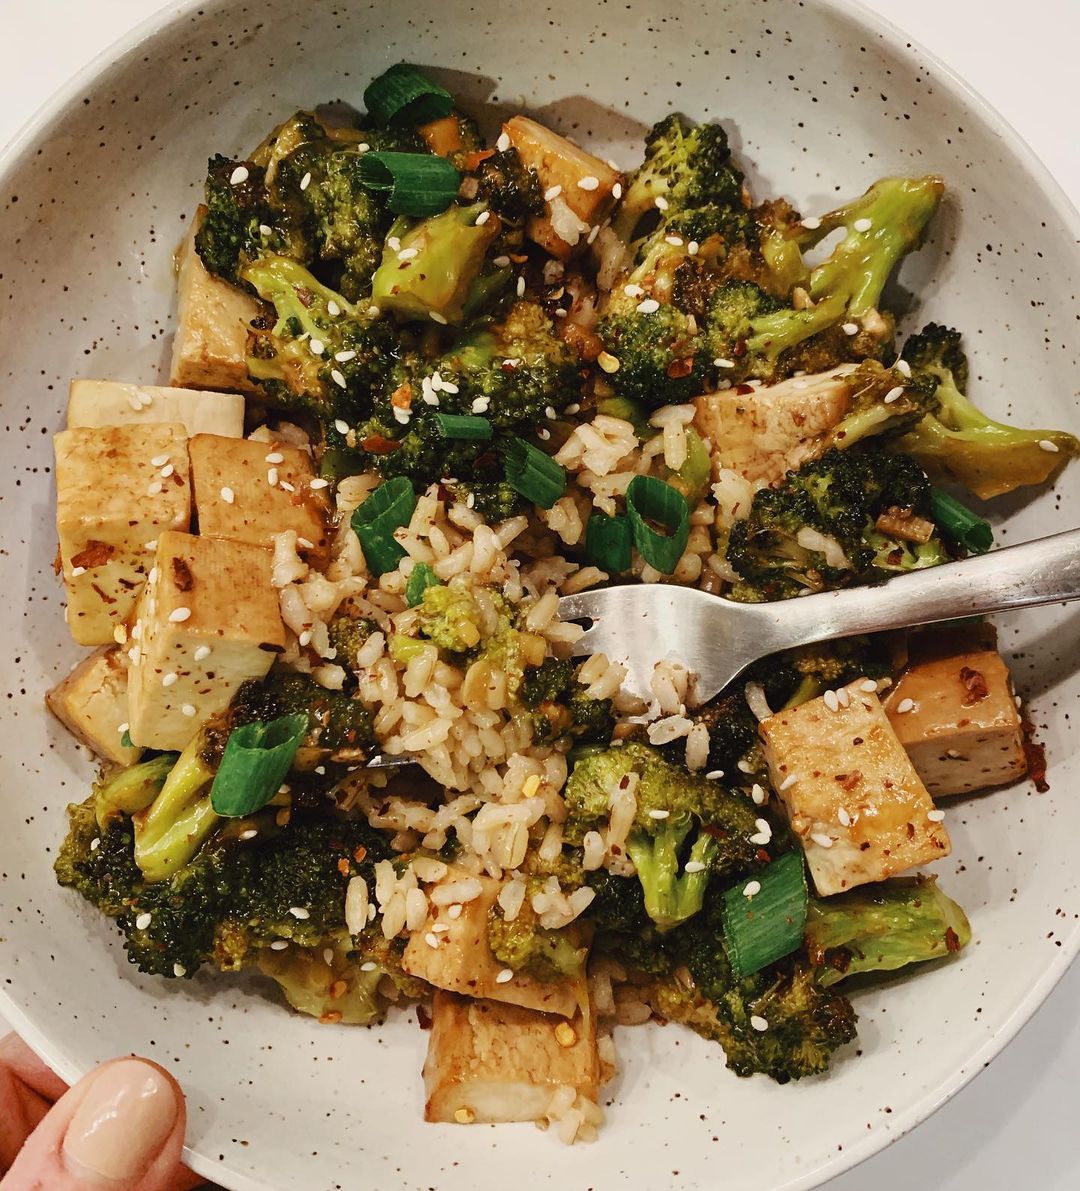 Spicy Tofu and Broccoli Stir Fry for Dinner Tonight